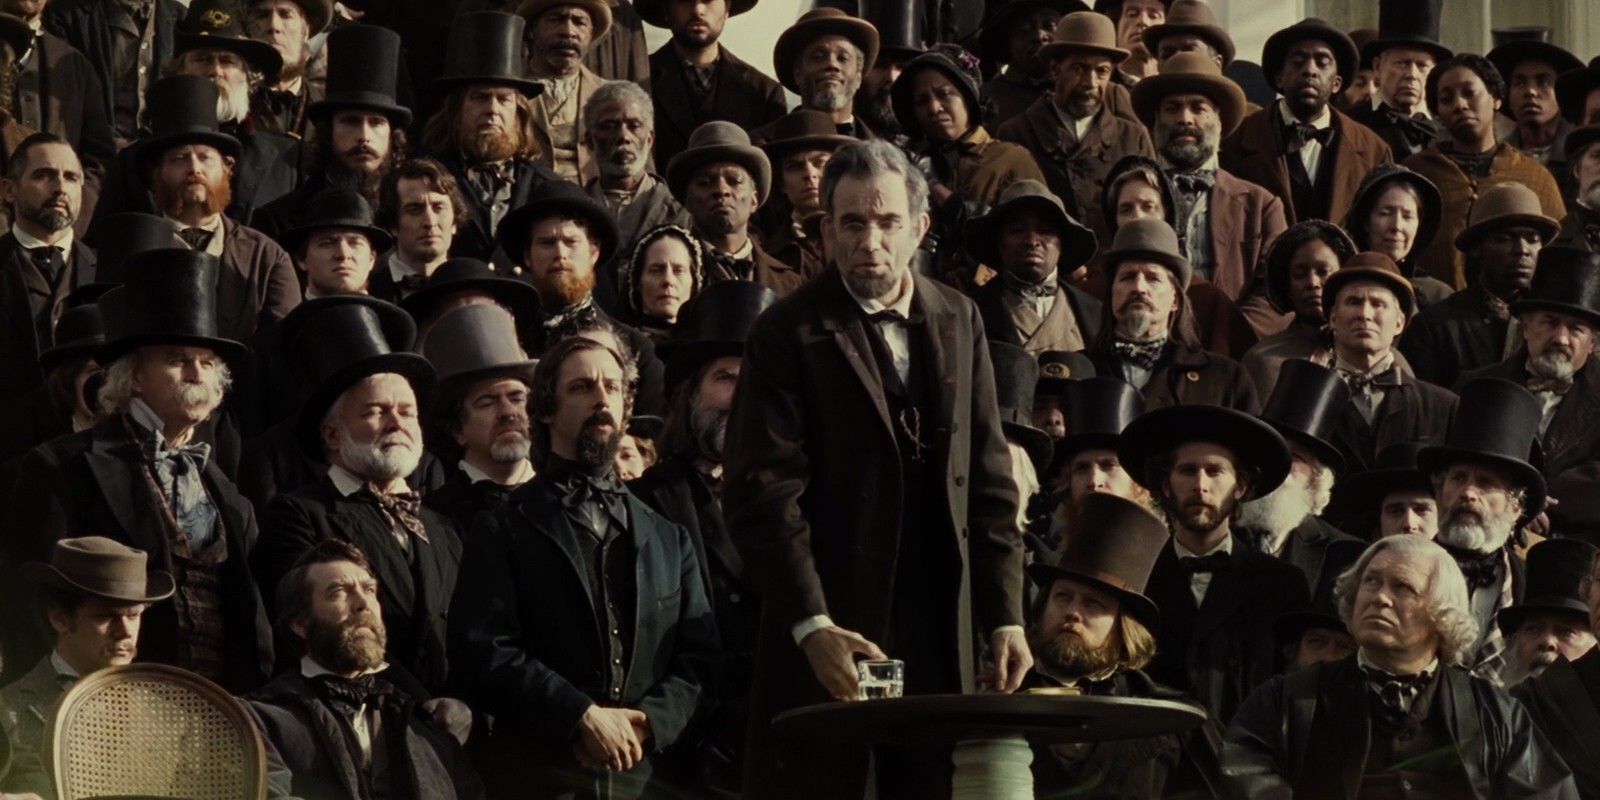 Lincoln given a speech in the movie. 